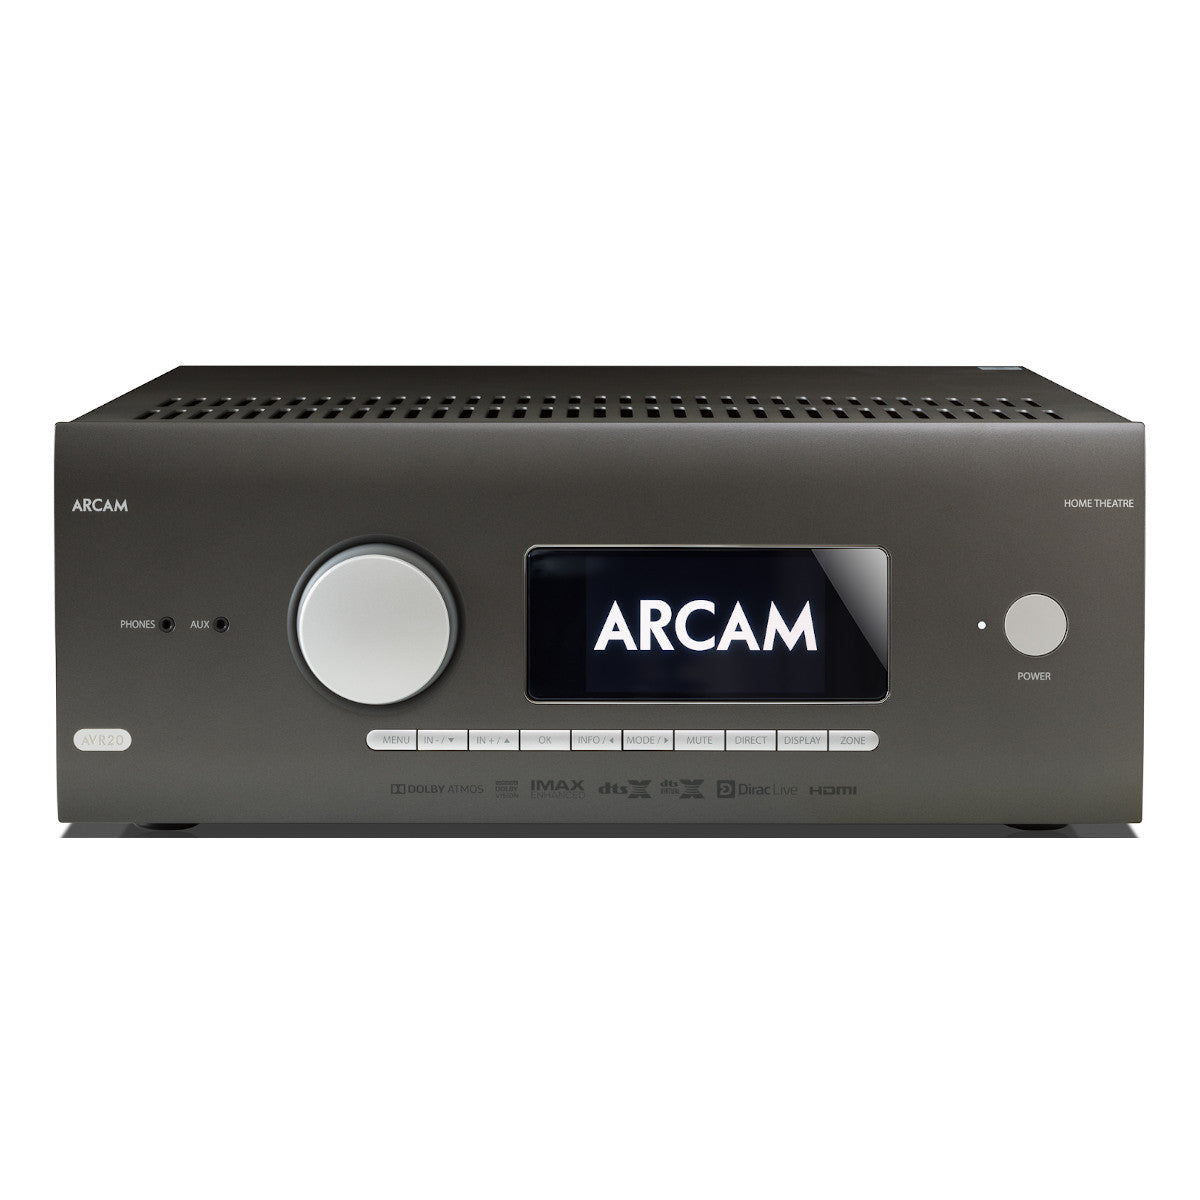 Arcam AVR20 Class AB 7.2 Channel Home Theater Receiver with Dolby Atmos & DTS:X 9.1.6 decoding